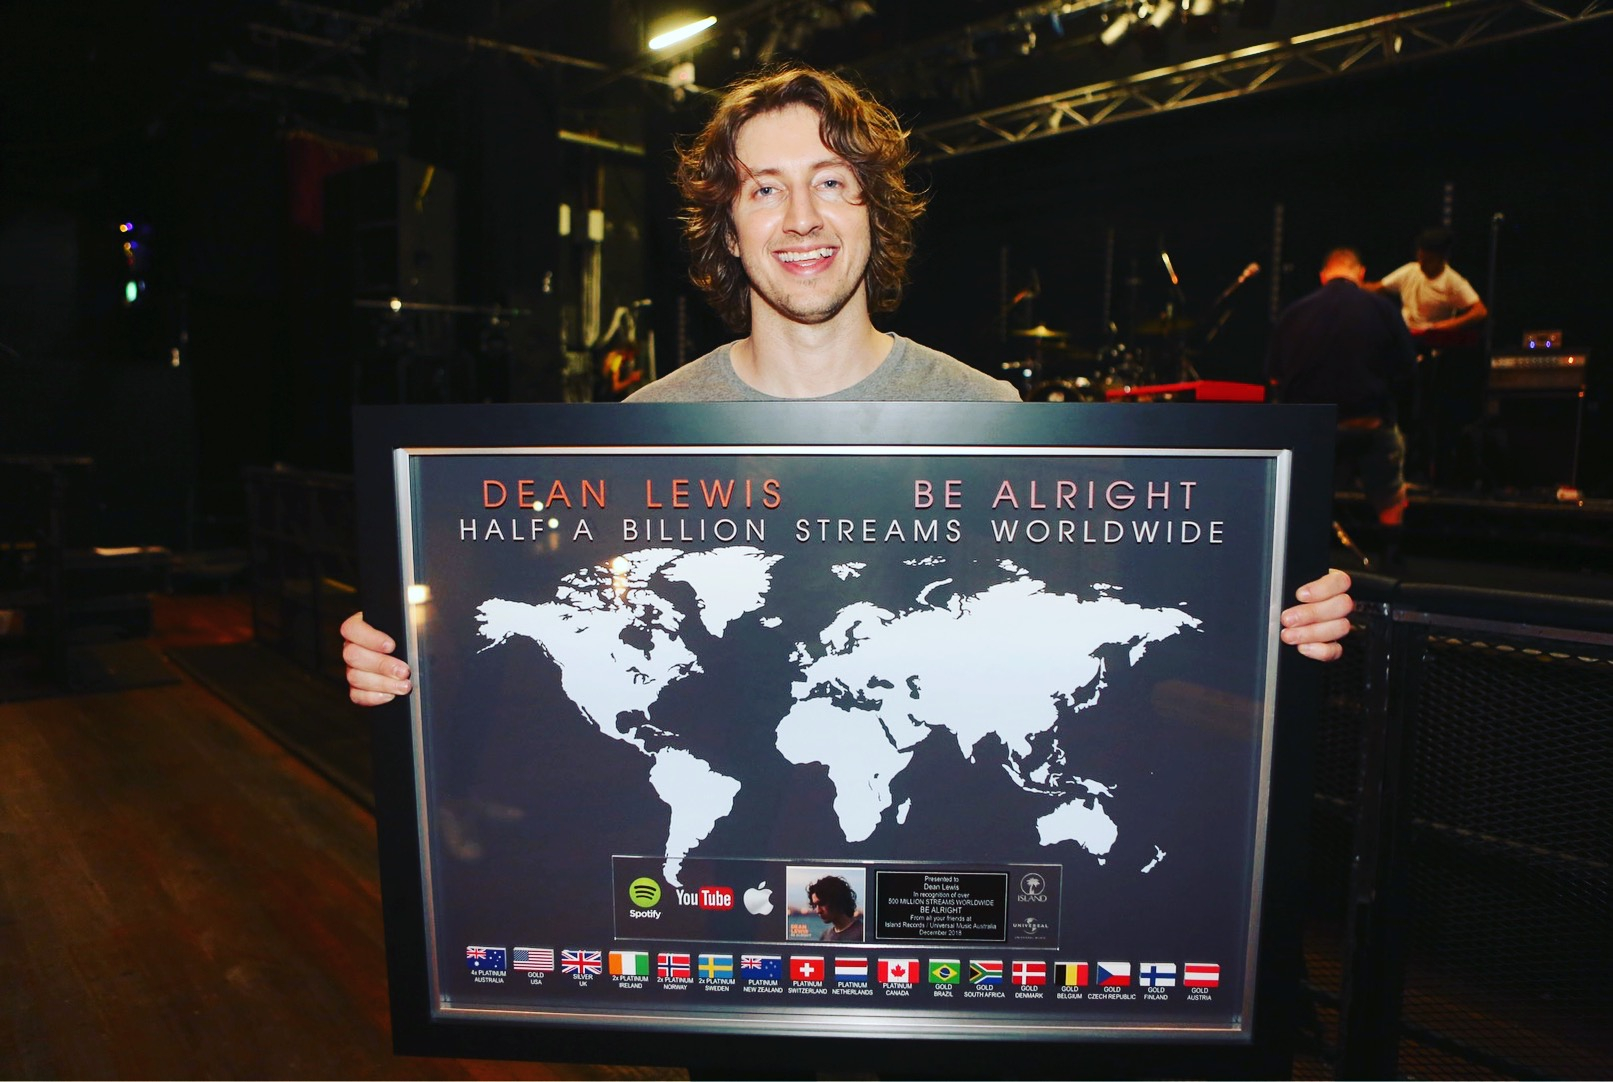 Dean Lewis’ ‘Be Alright’ goes Gold in the US